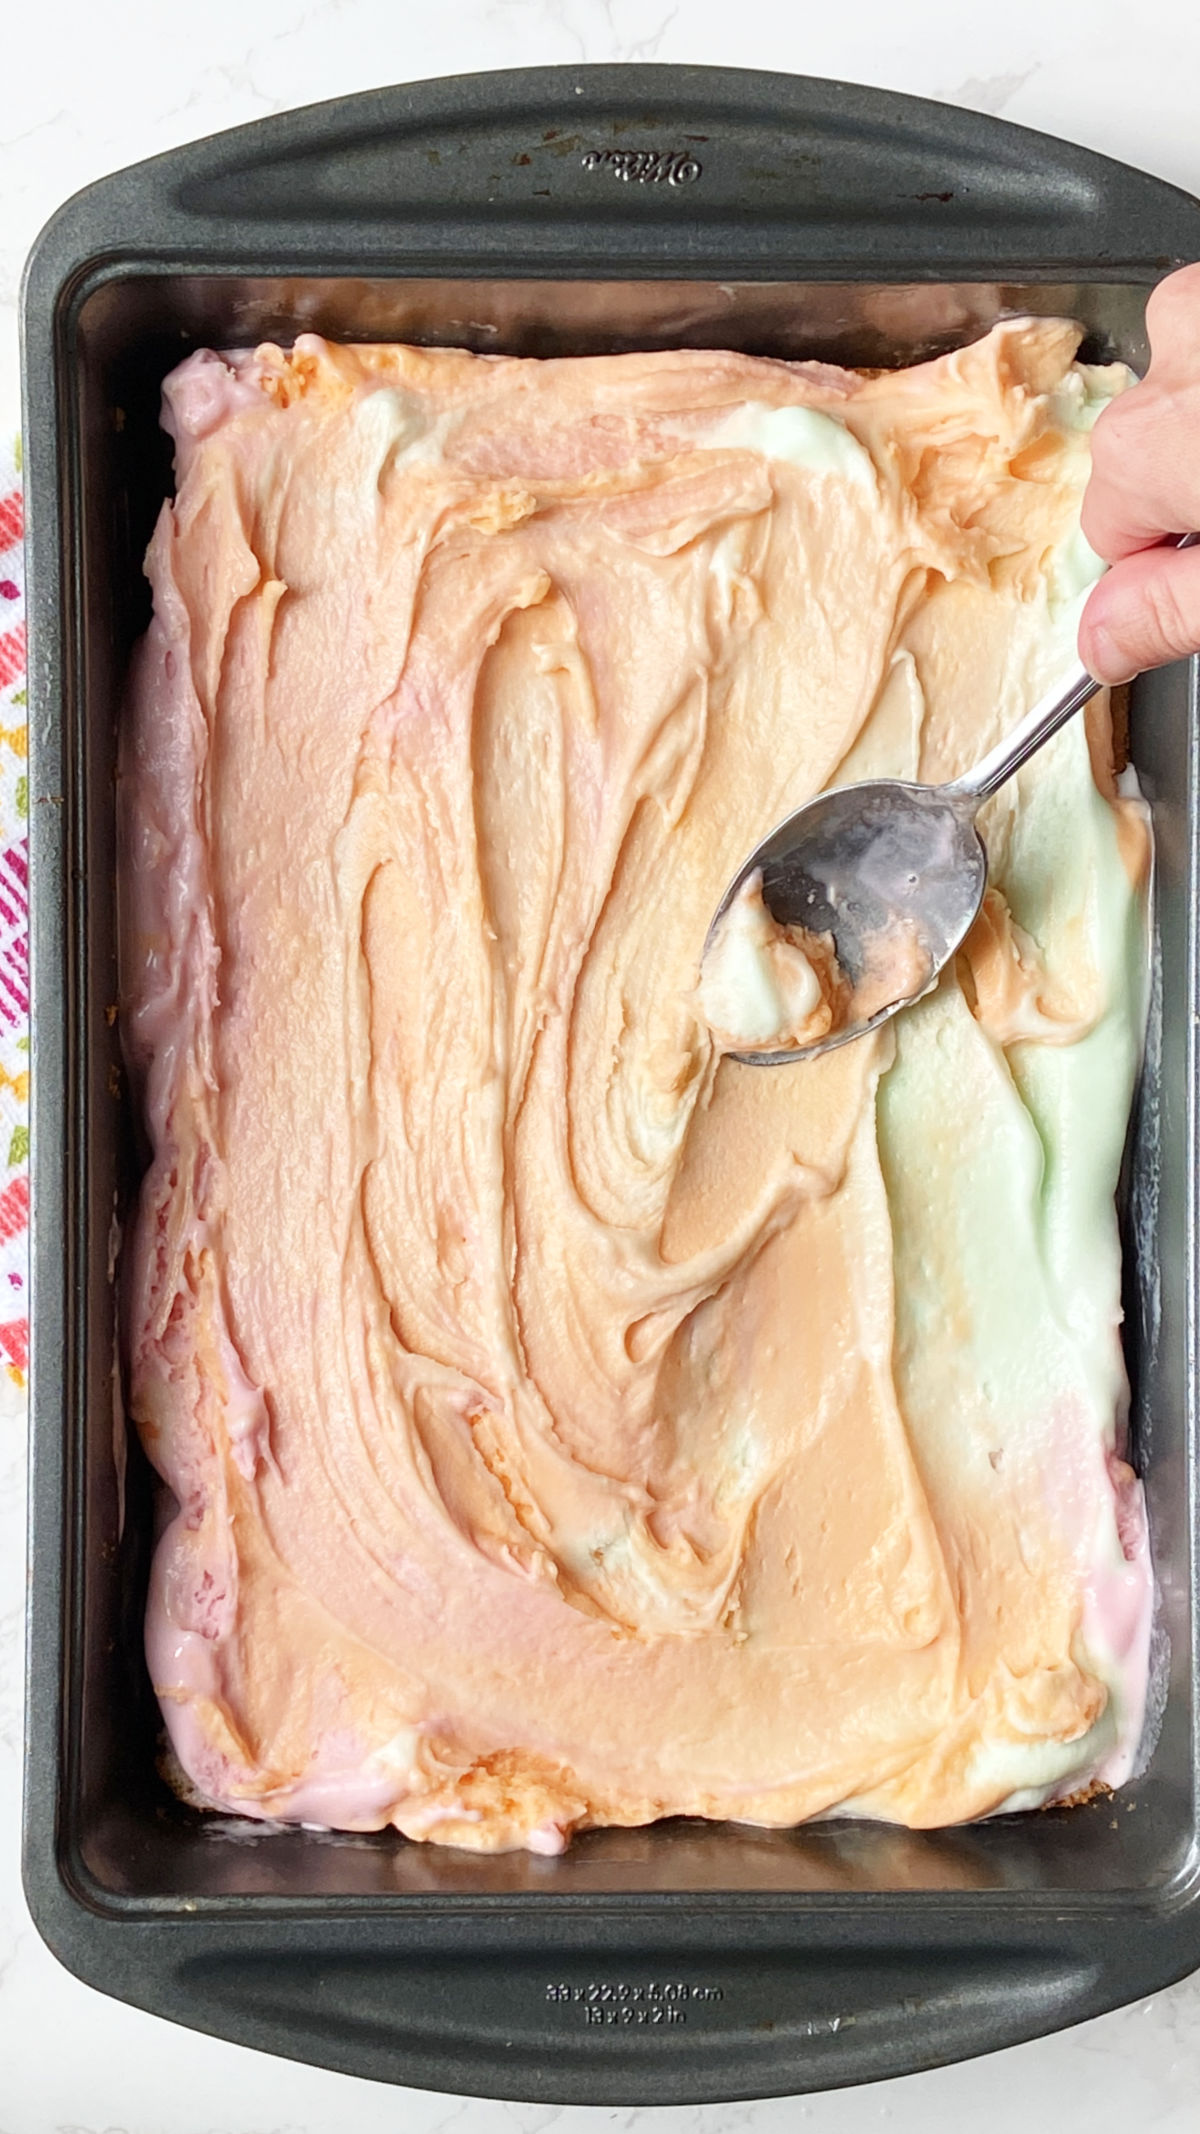 Softened rainbow sherbet in a cake pan. 